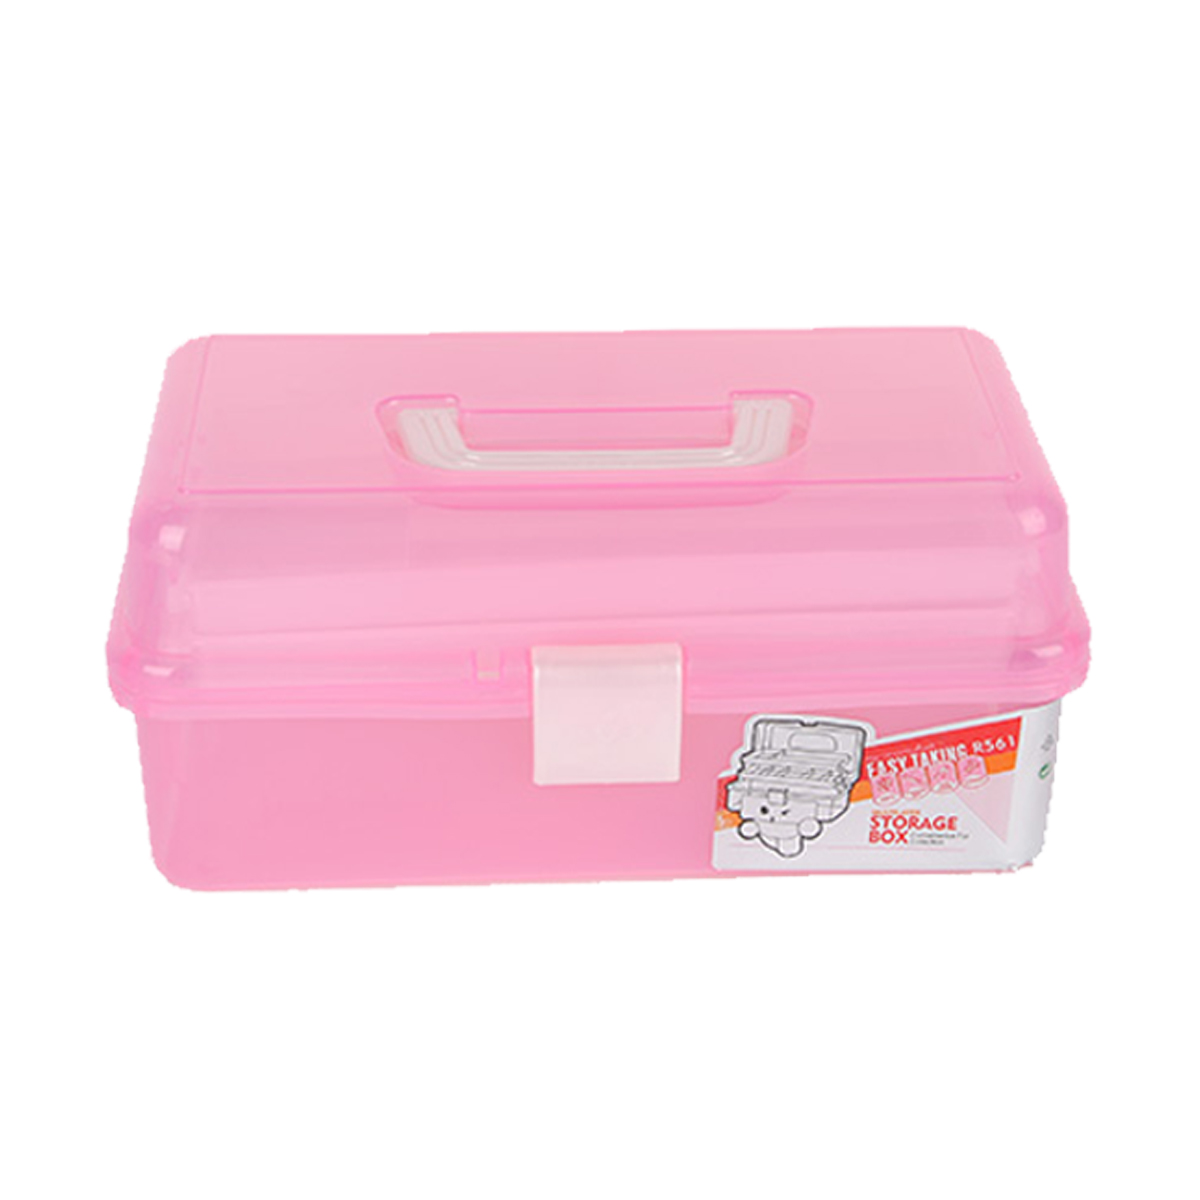 Clear-Plastic-Craft-Makeup-Organizer-Jewelry-Storage-Compartment-Tools-Box-Case-1263882-2